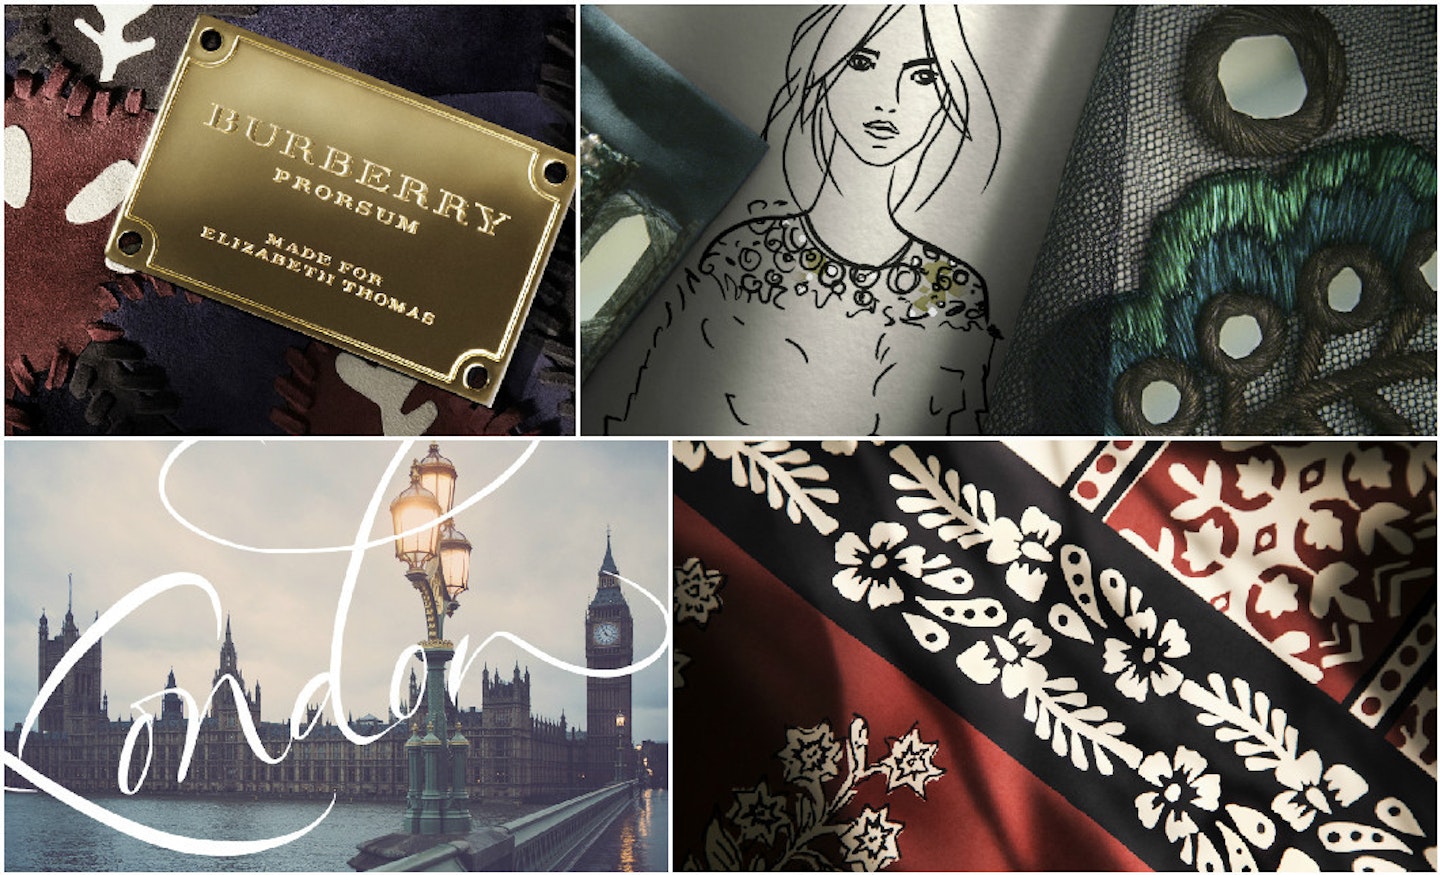 A behind the scenes look at today's Burberry show [Burberry]